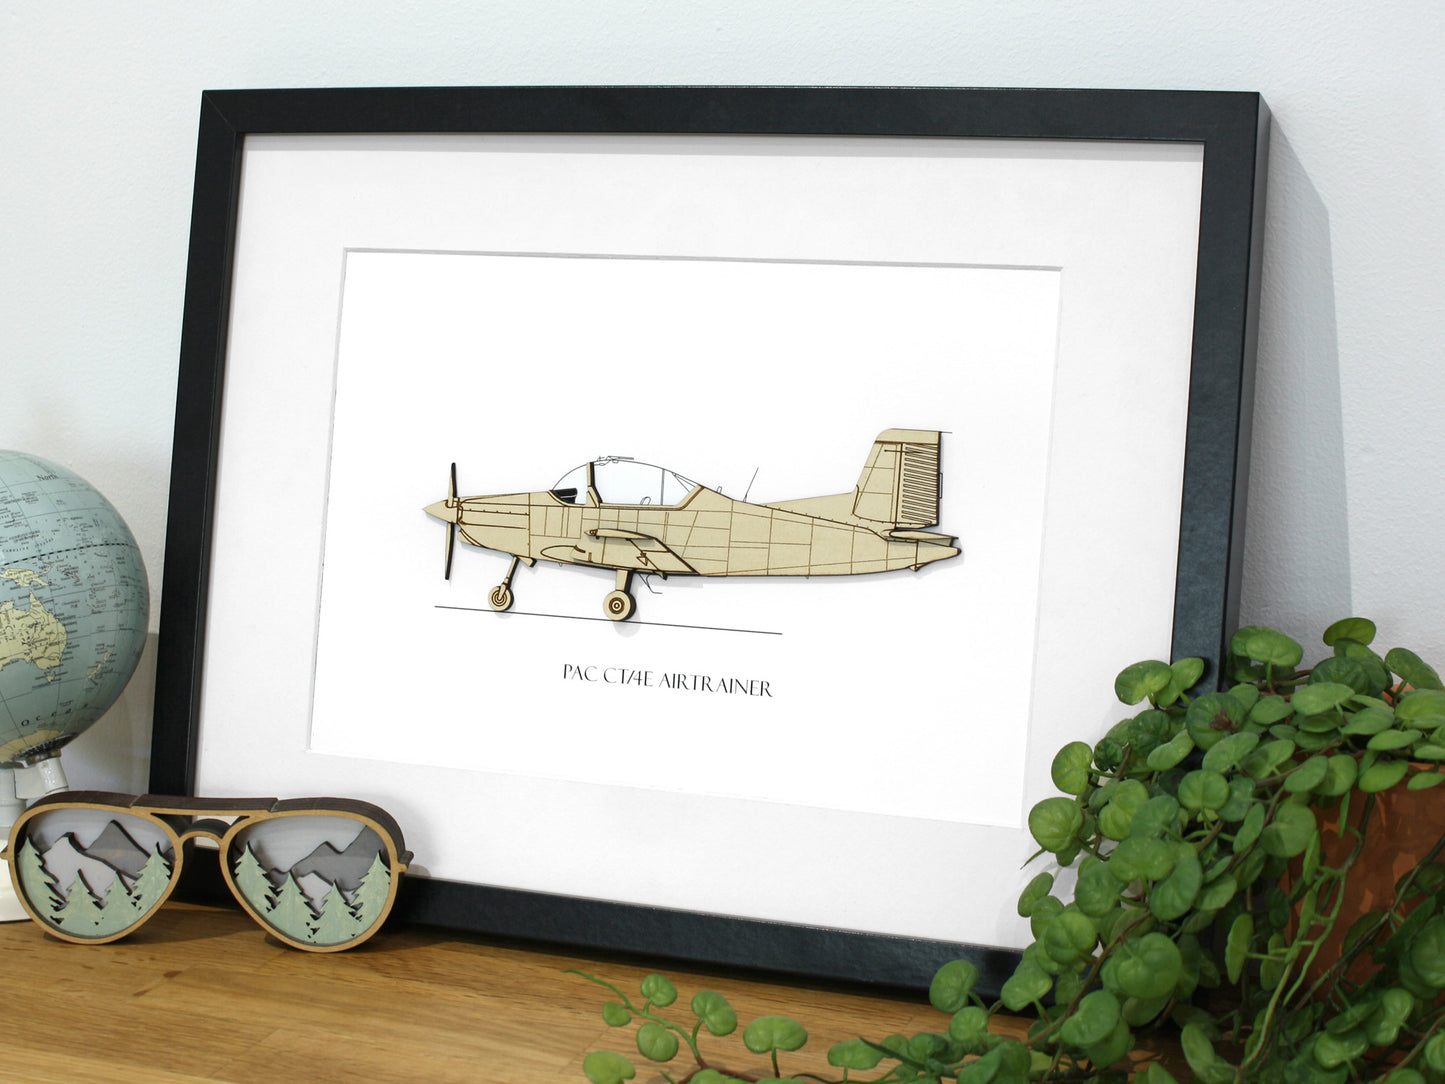 PAC CT/4E Airtrainer pilot gifts